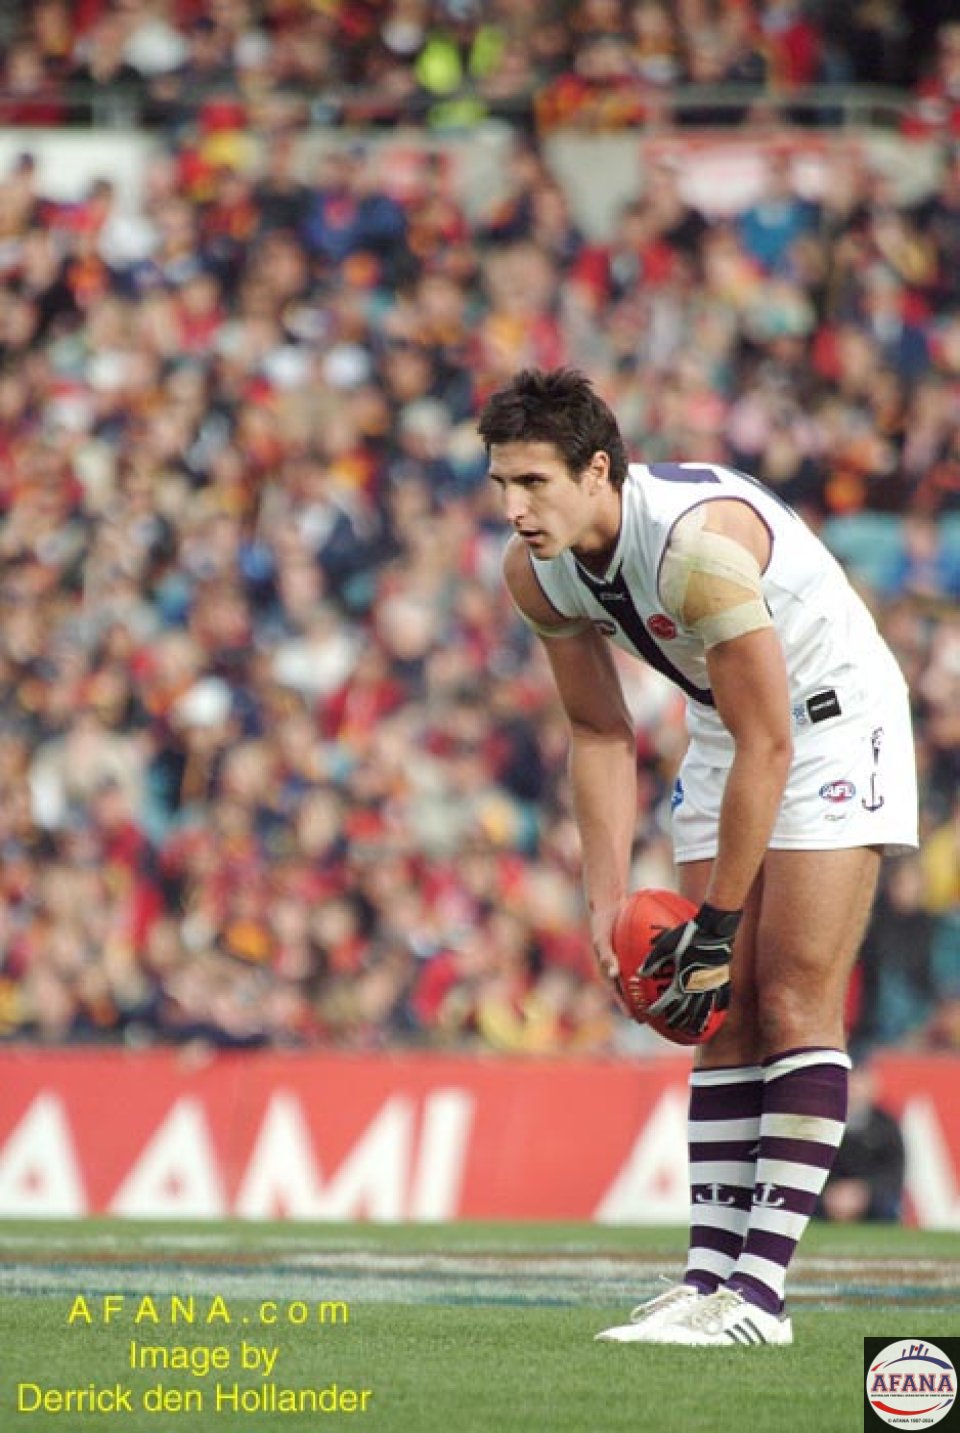 [b]Matthew Pavlich lines up an attempt for goal for the Fremantle Dockers[/b]